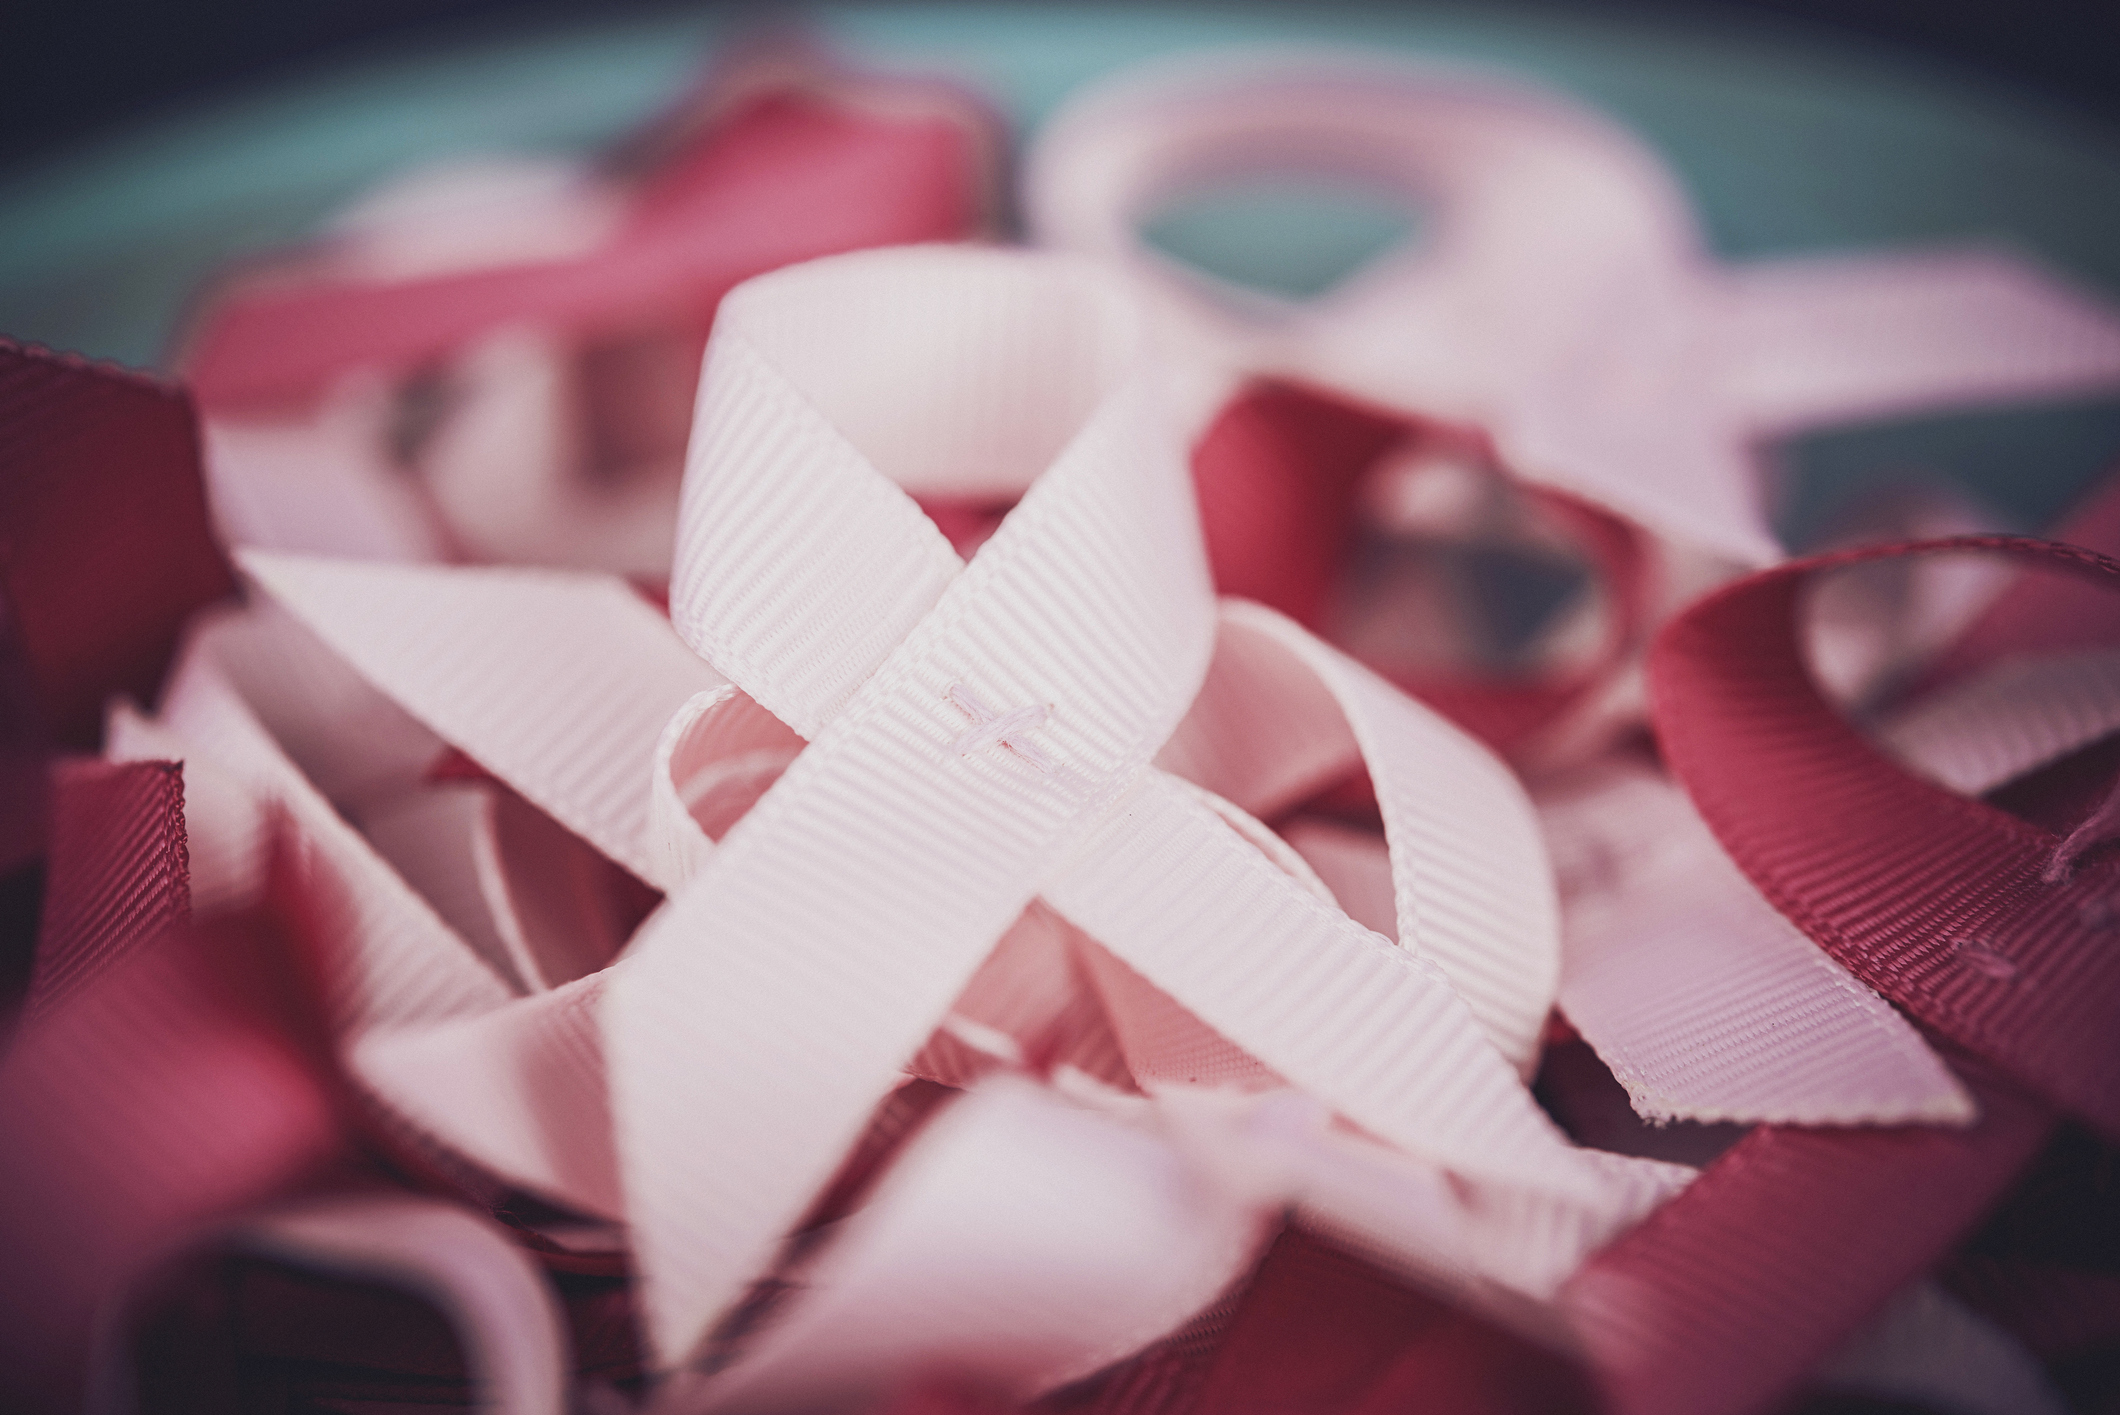 Mangat Copit Plastic Surgery and Skin Care Blog | A Breast Health How-To to Start National Breast Cancer Awareness Month